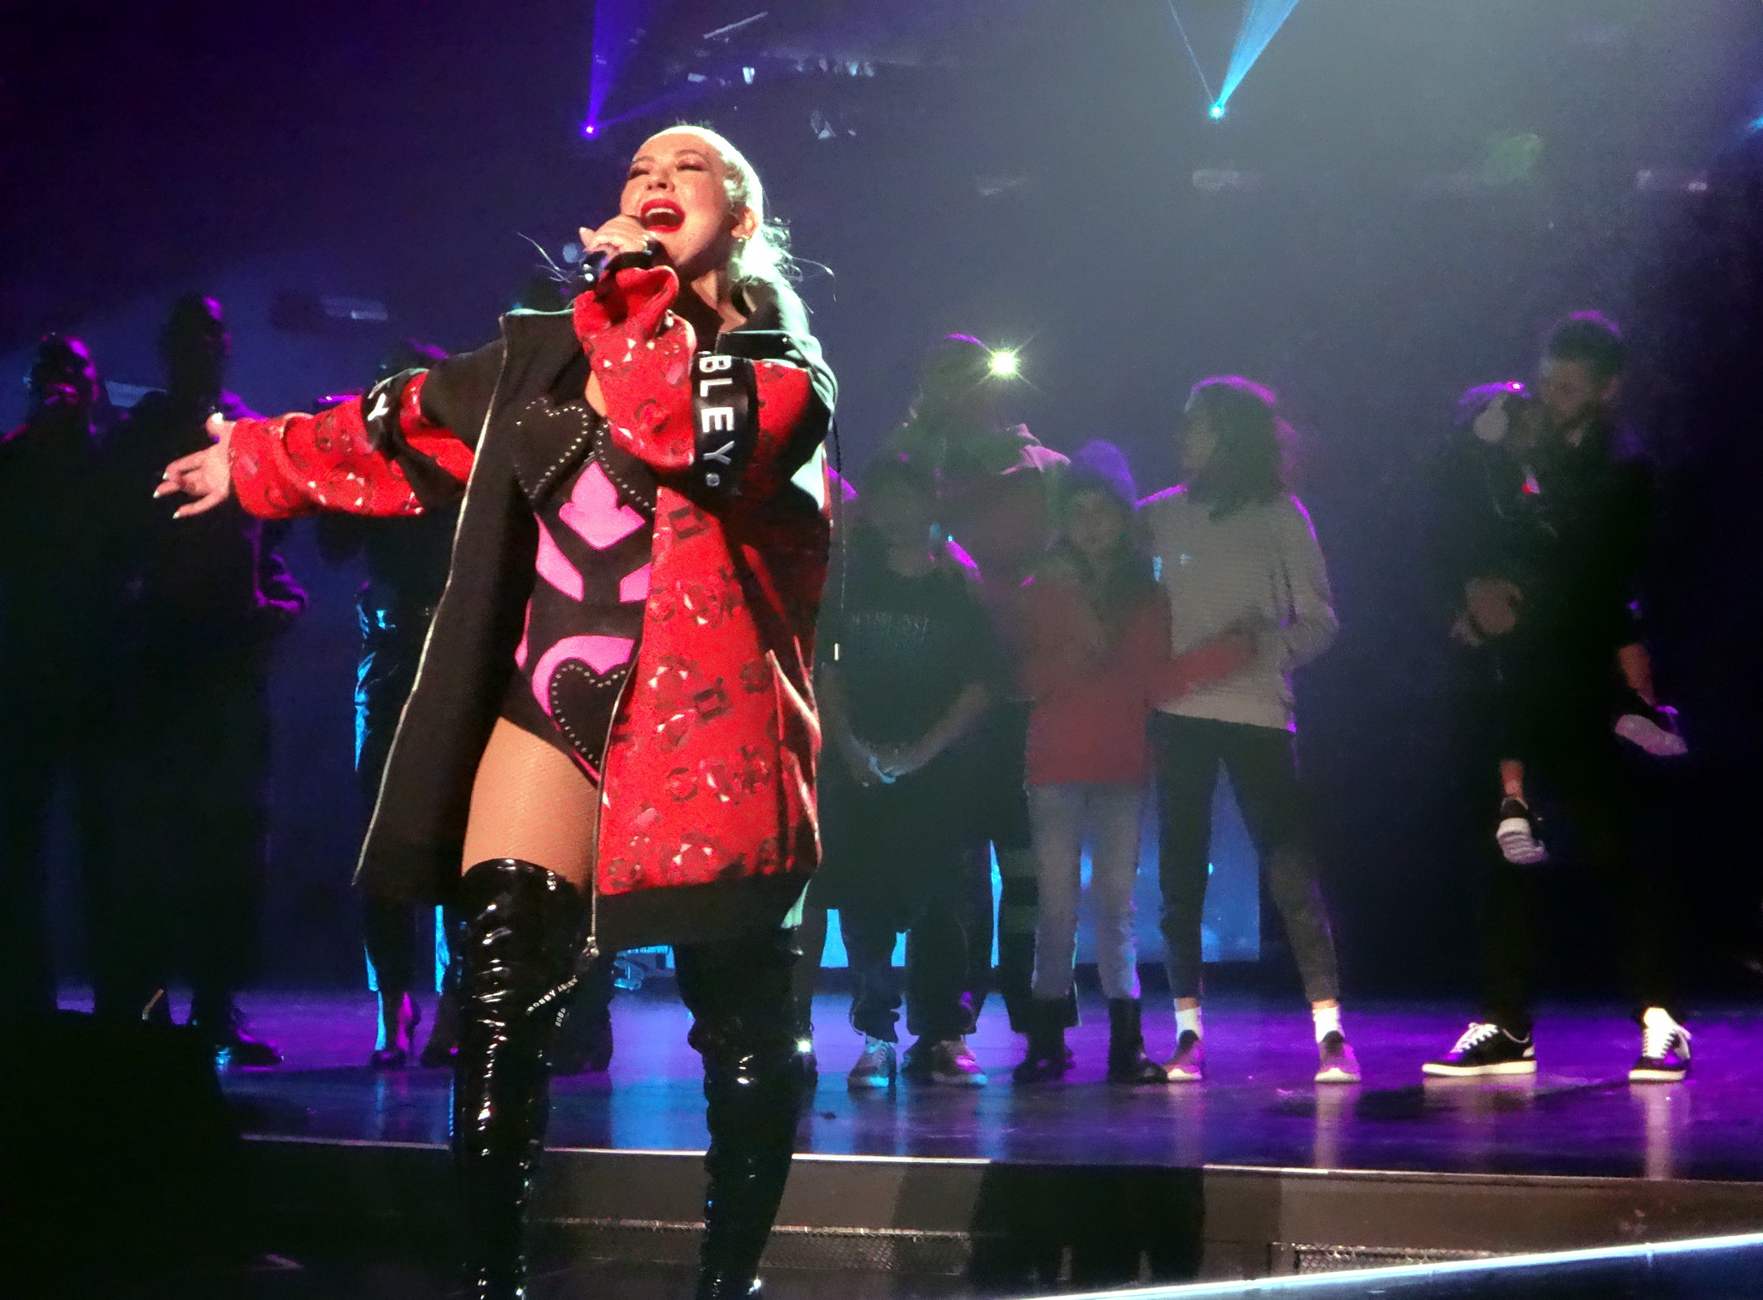 Christina_Aguilera_-_performing_for_a_New_Year_s_Eve_Performance_at_Zappos_Theatre_in_Las_Vegas2C_NV__12312019-05.jpg